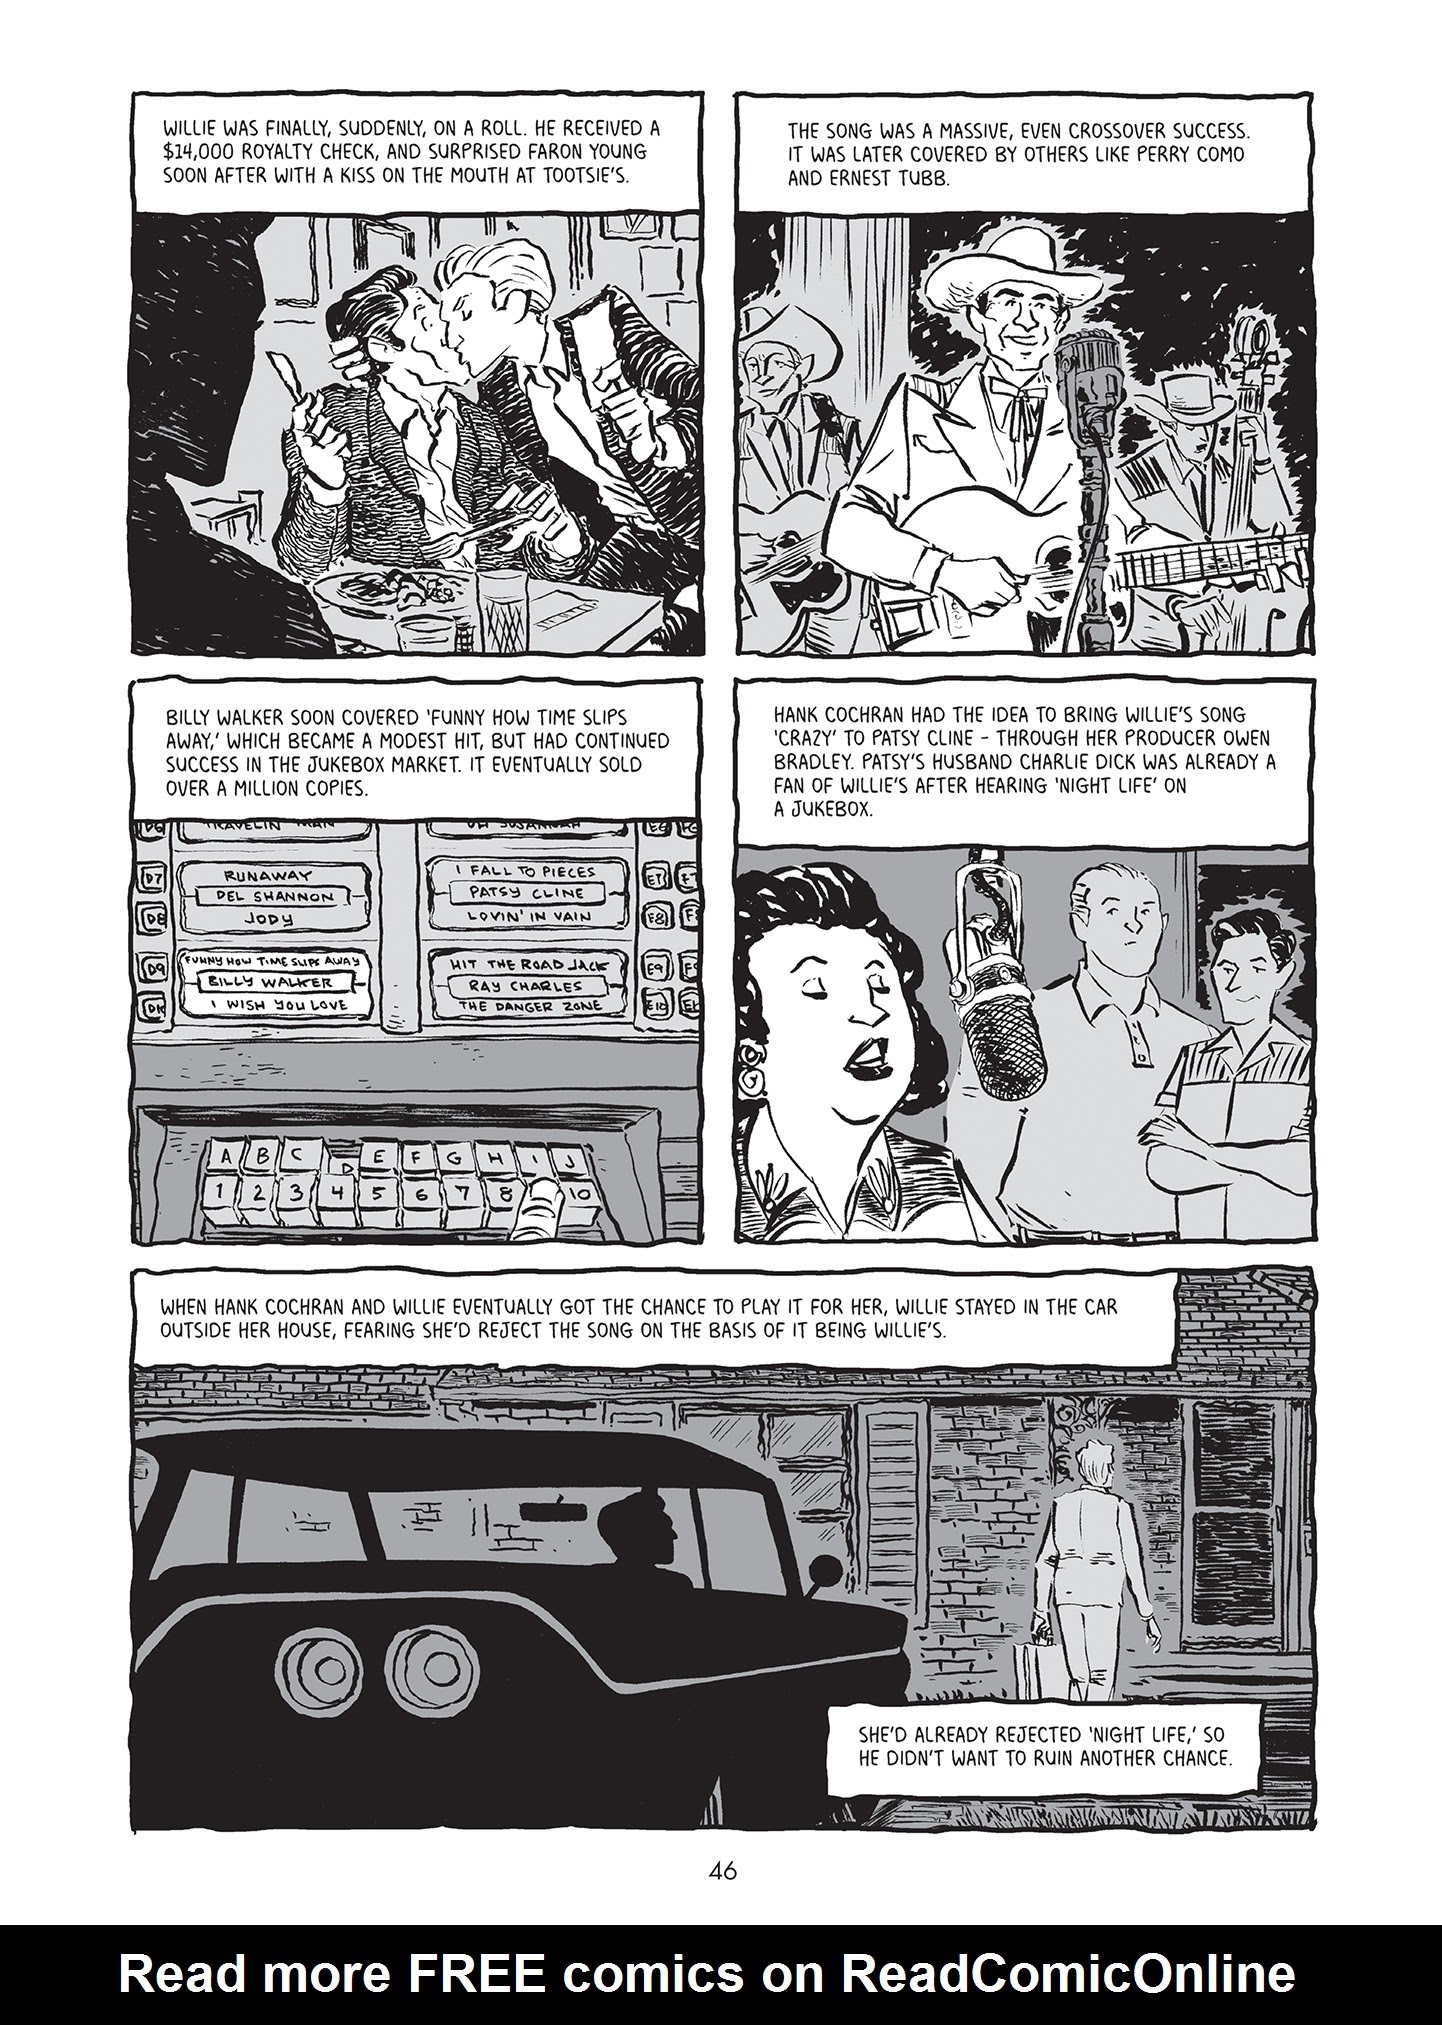 Read online Willie Nelson: A Graphic History comic -  Issue # TPB - 44